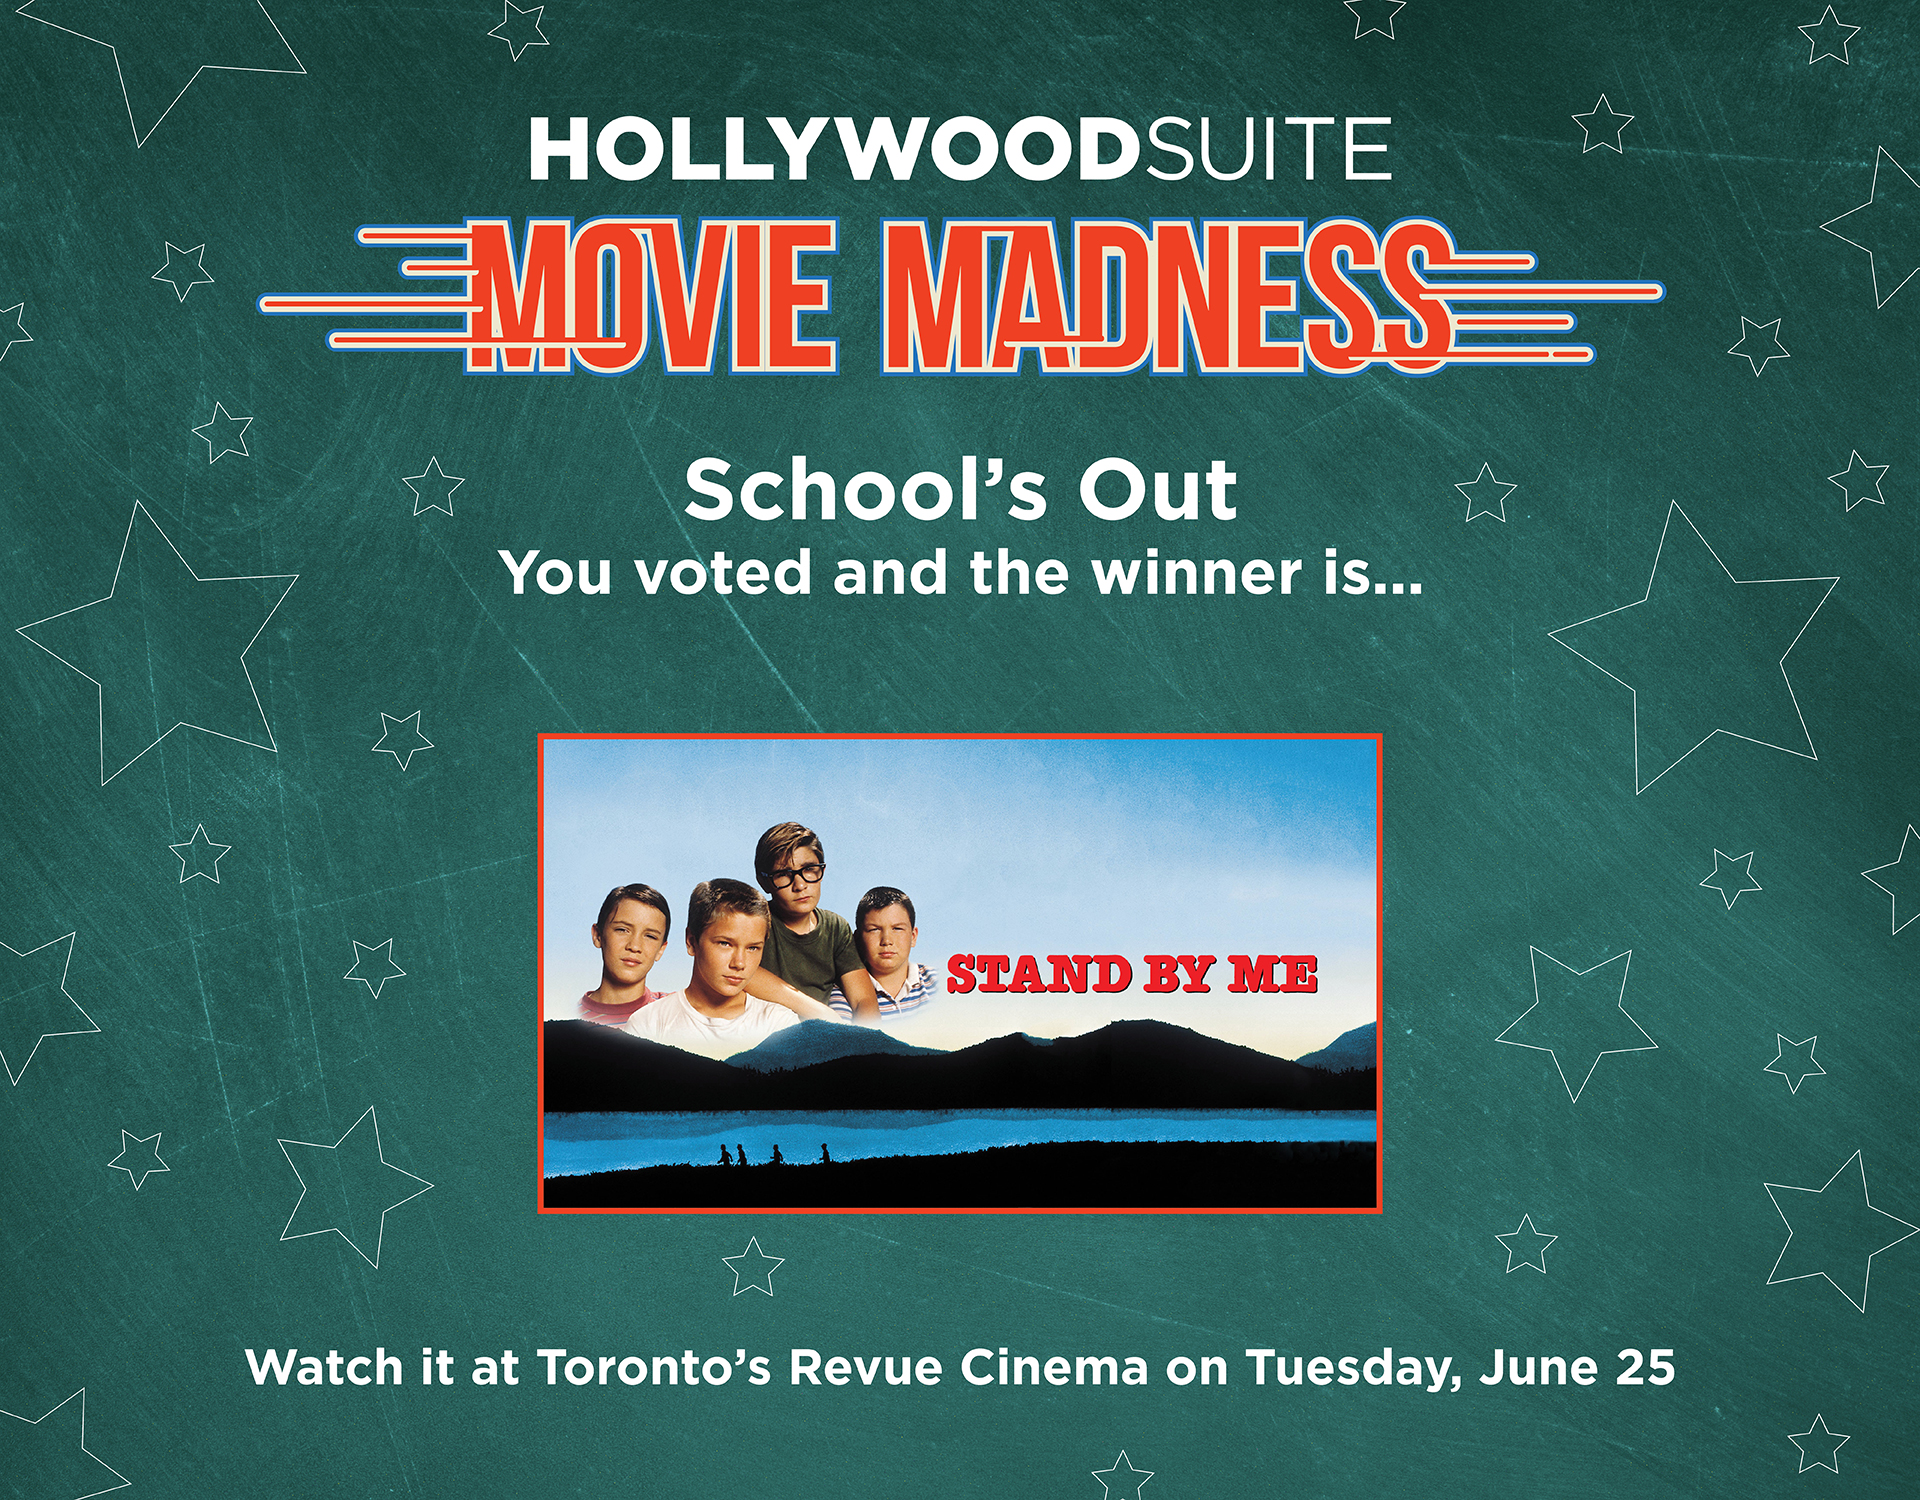 Hollywood Suite Movie Madness - School's Out. You voted and the winner is... Stand By Me. Watch it at Toronto's Revue Cinema on Tuesday, June 25